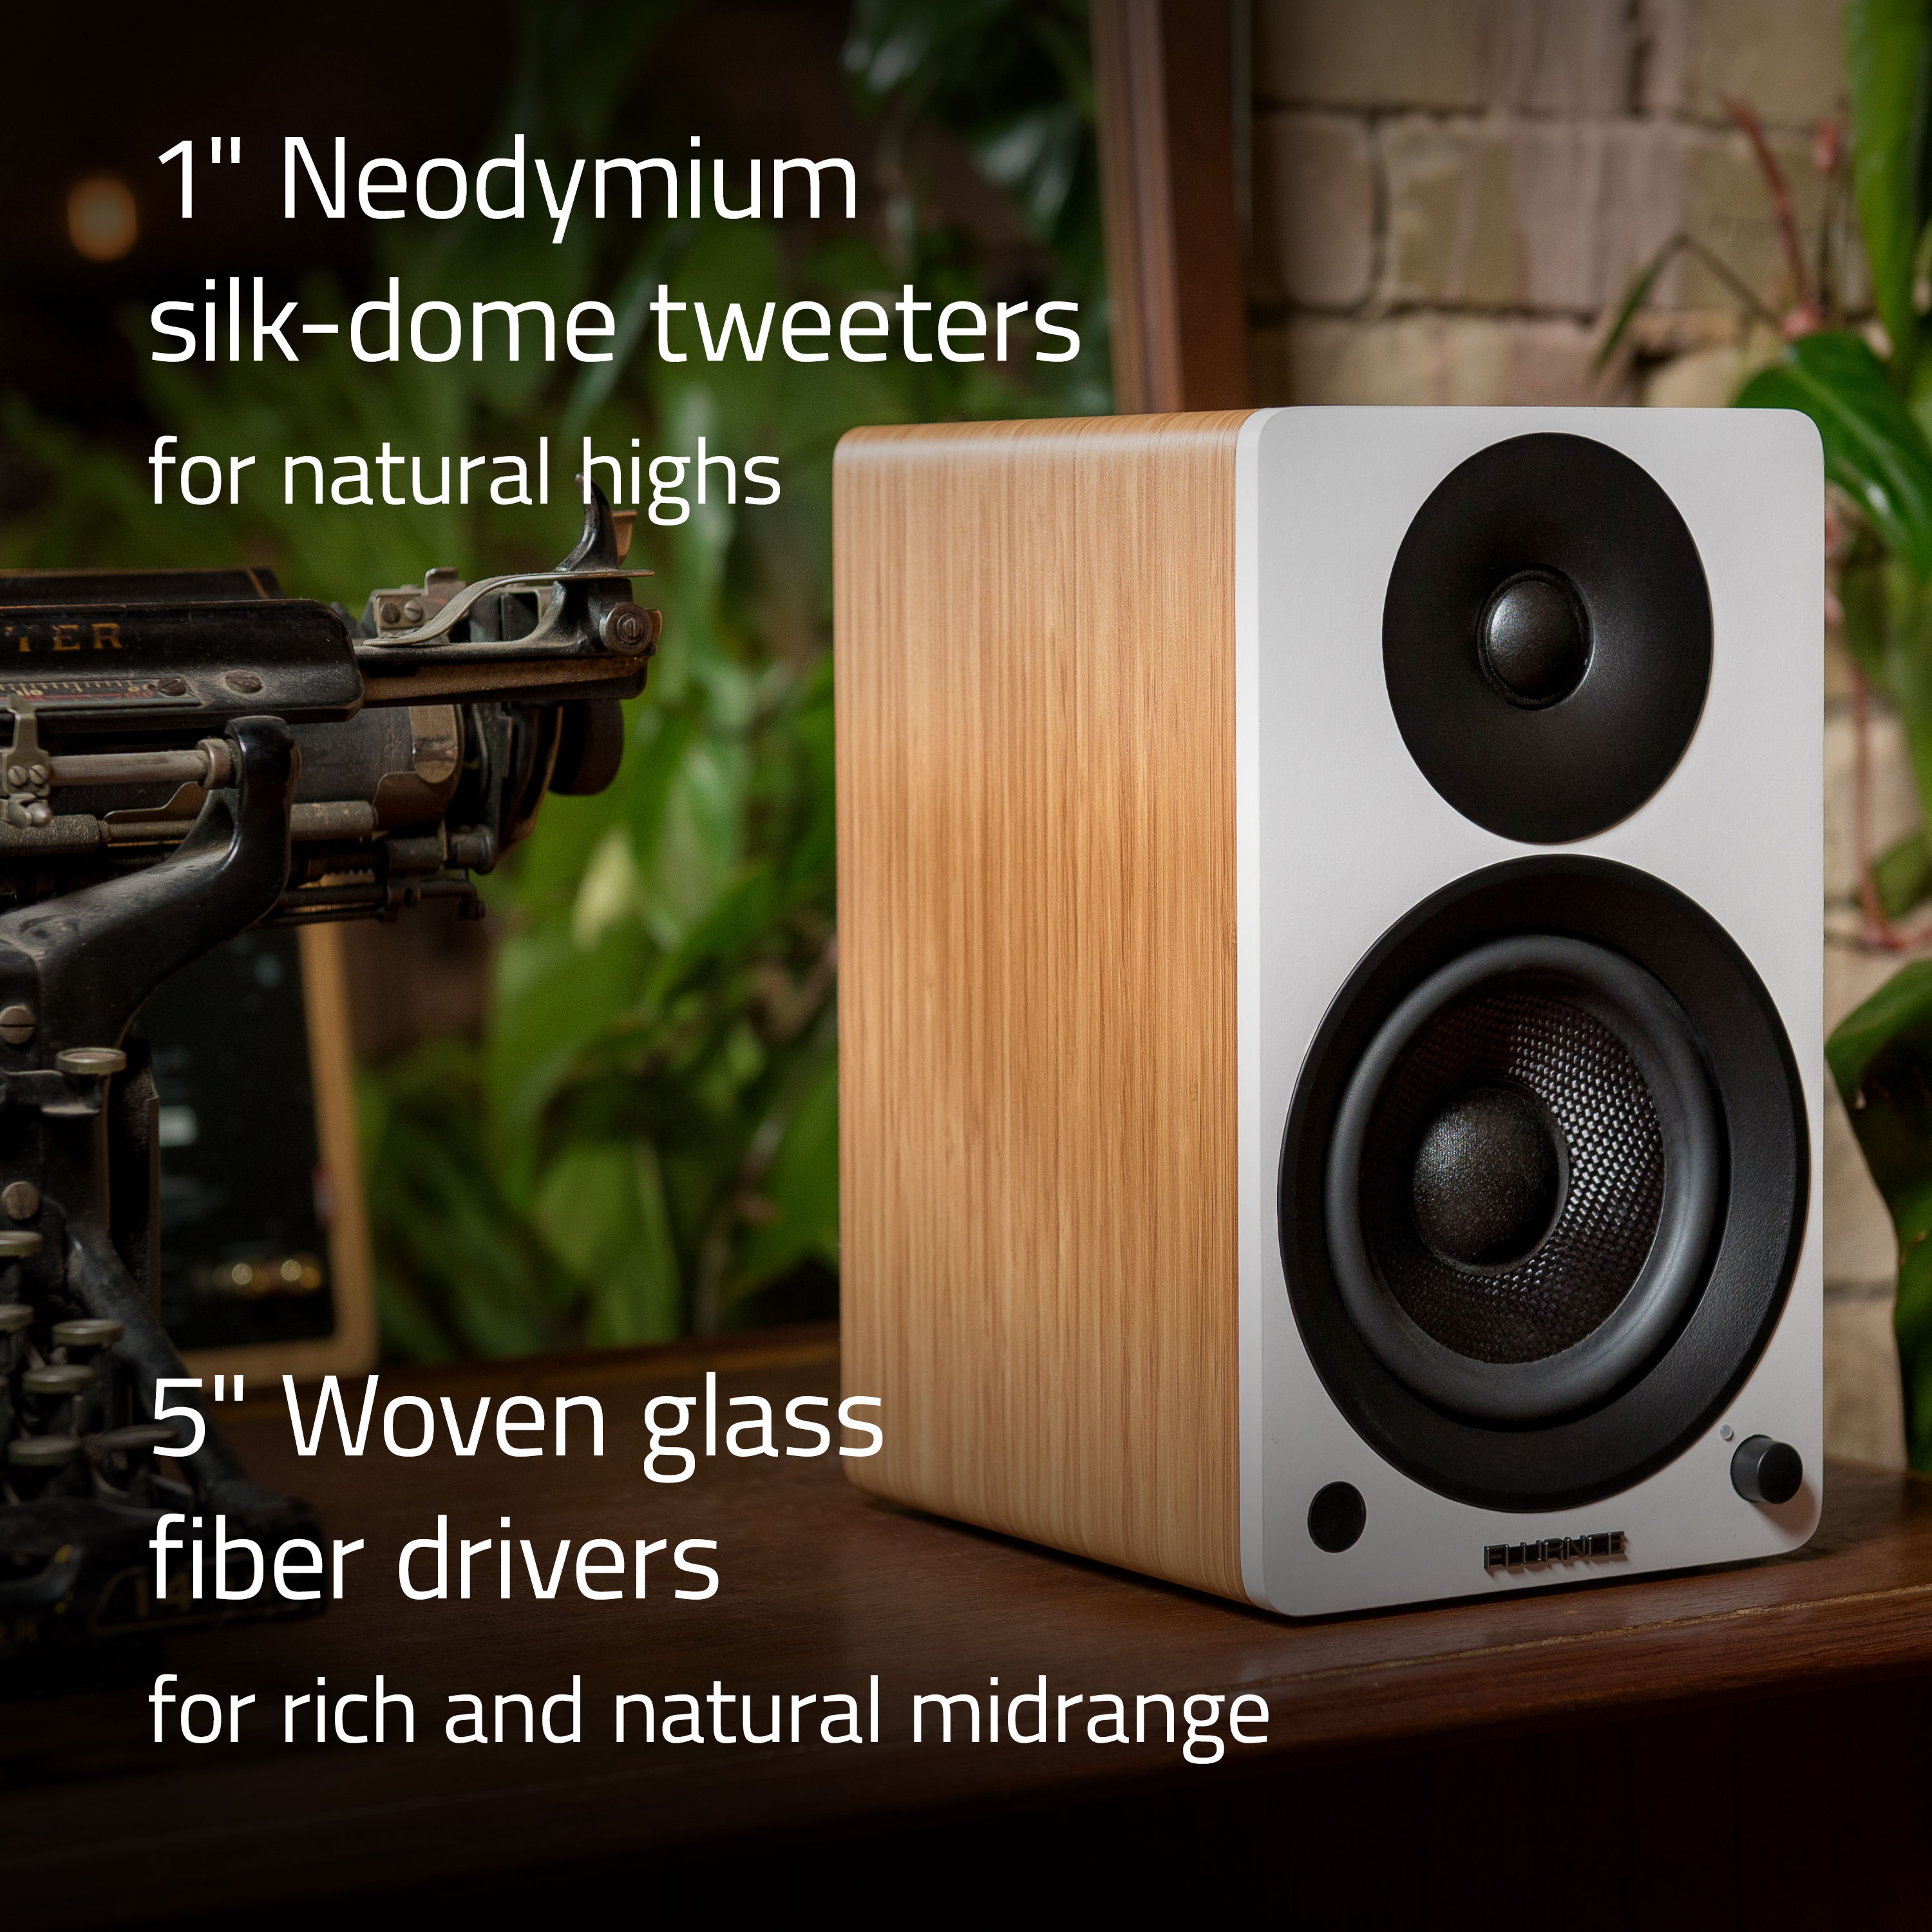 Fluance Ai41 Powered 2.0 Stereo Bookshelf Speakers with 5" Drivers, 90W Amplifier, and High Density Foam Isolation Pads